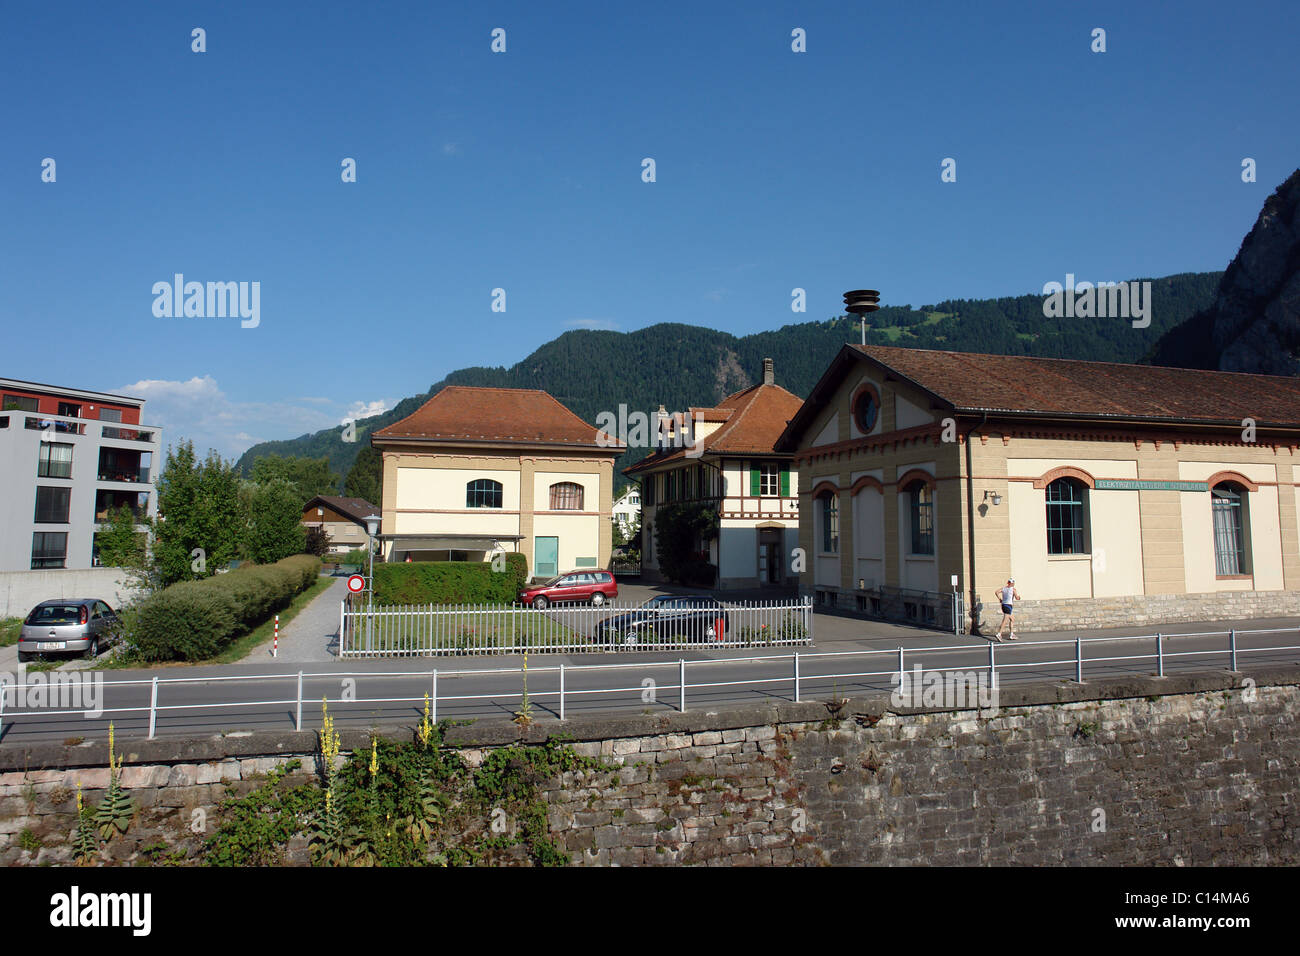 View of buildings in Interlaken next to the canal leading to lake Thun. In the background are hills covered with greenery. Stock Photo